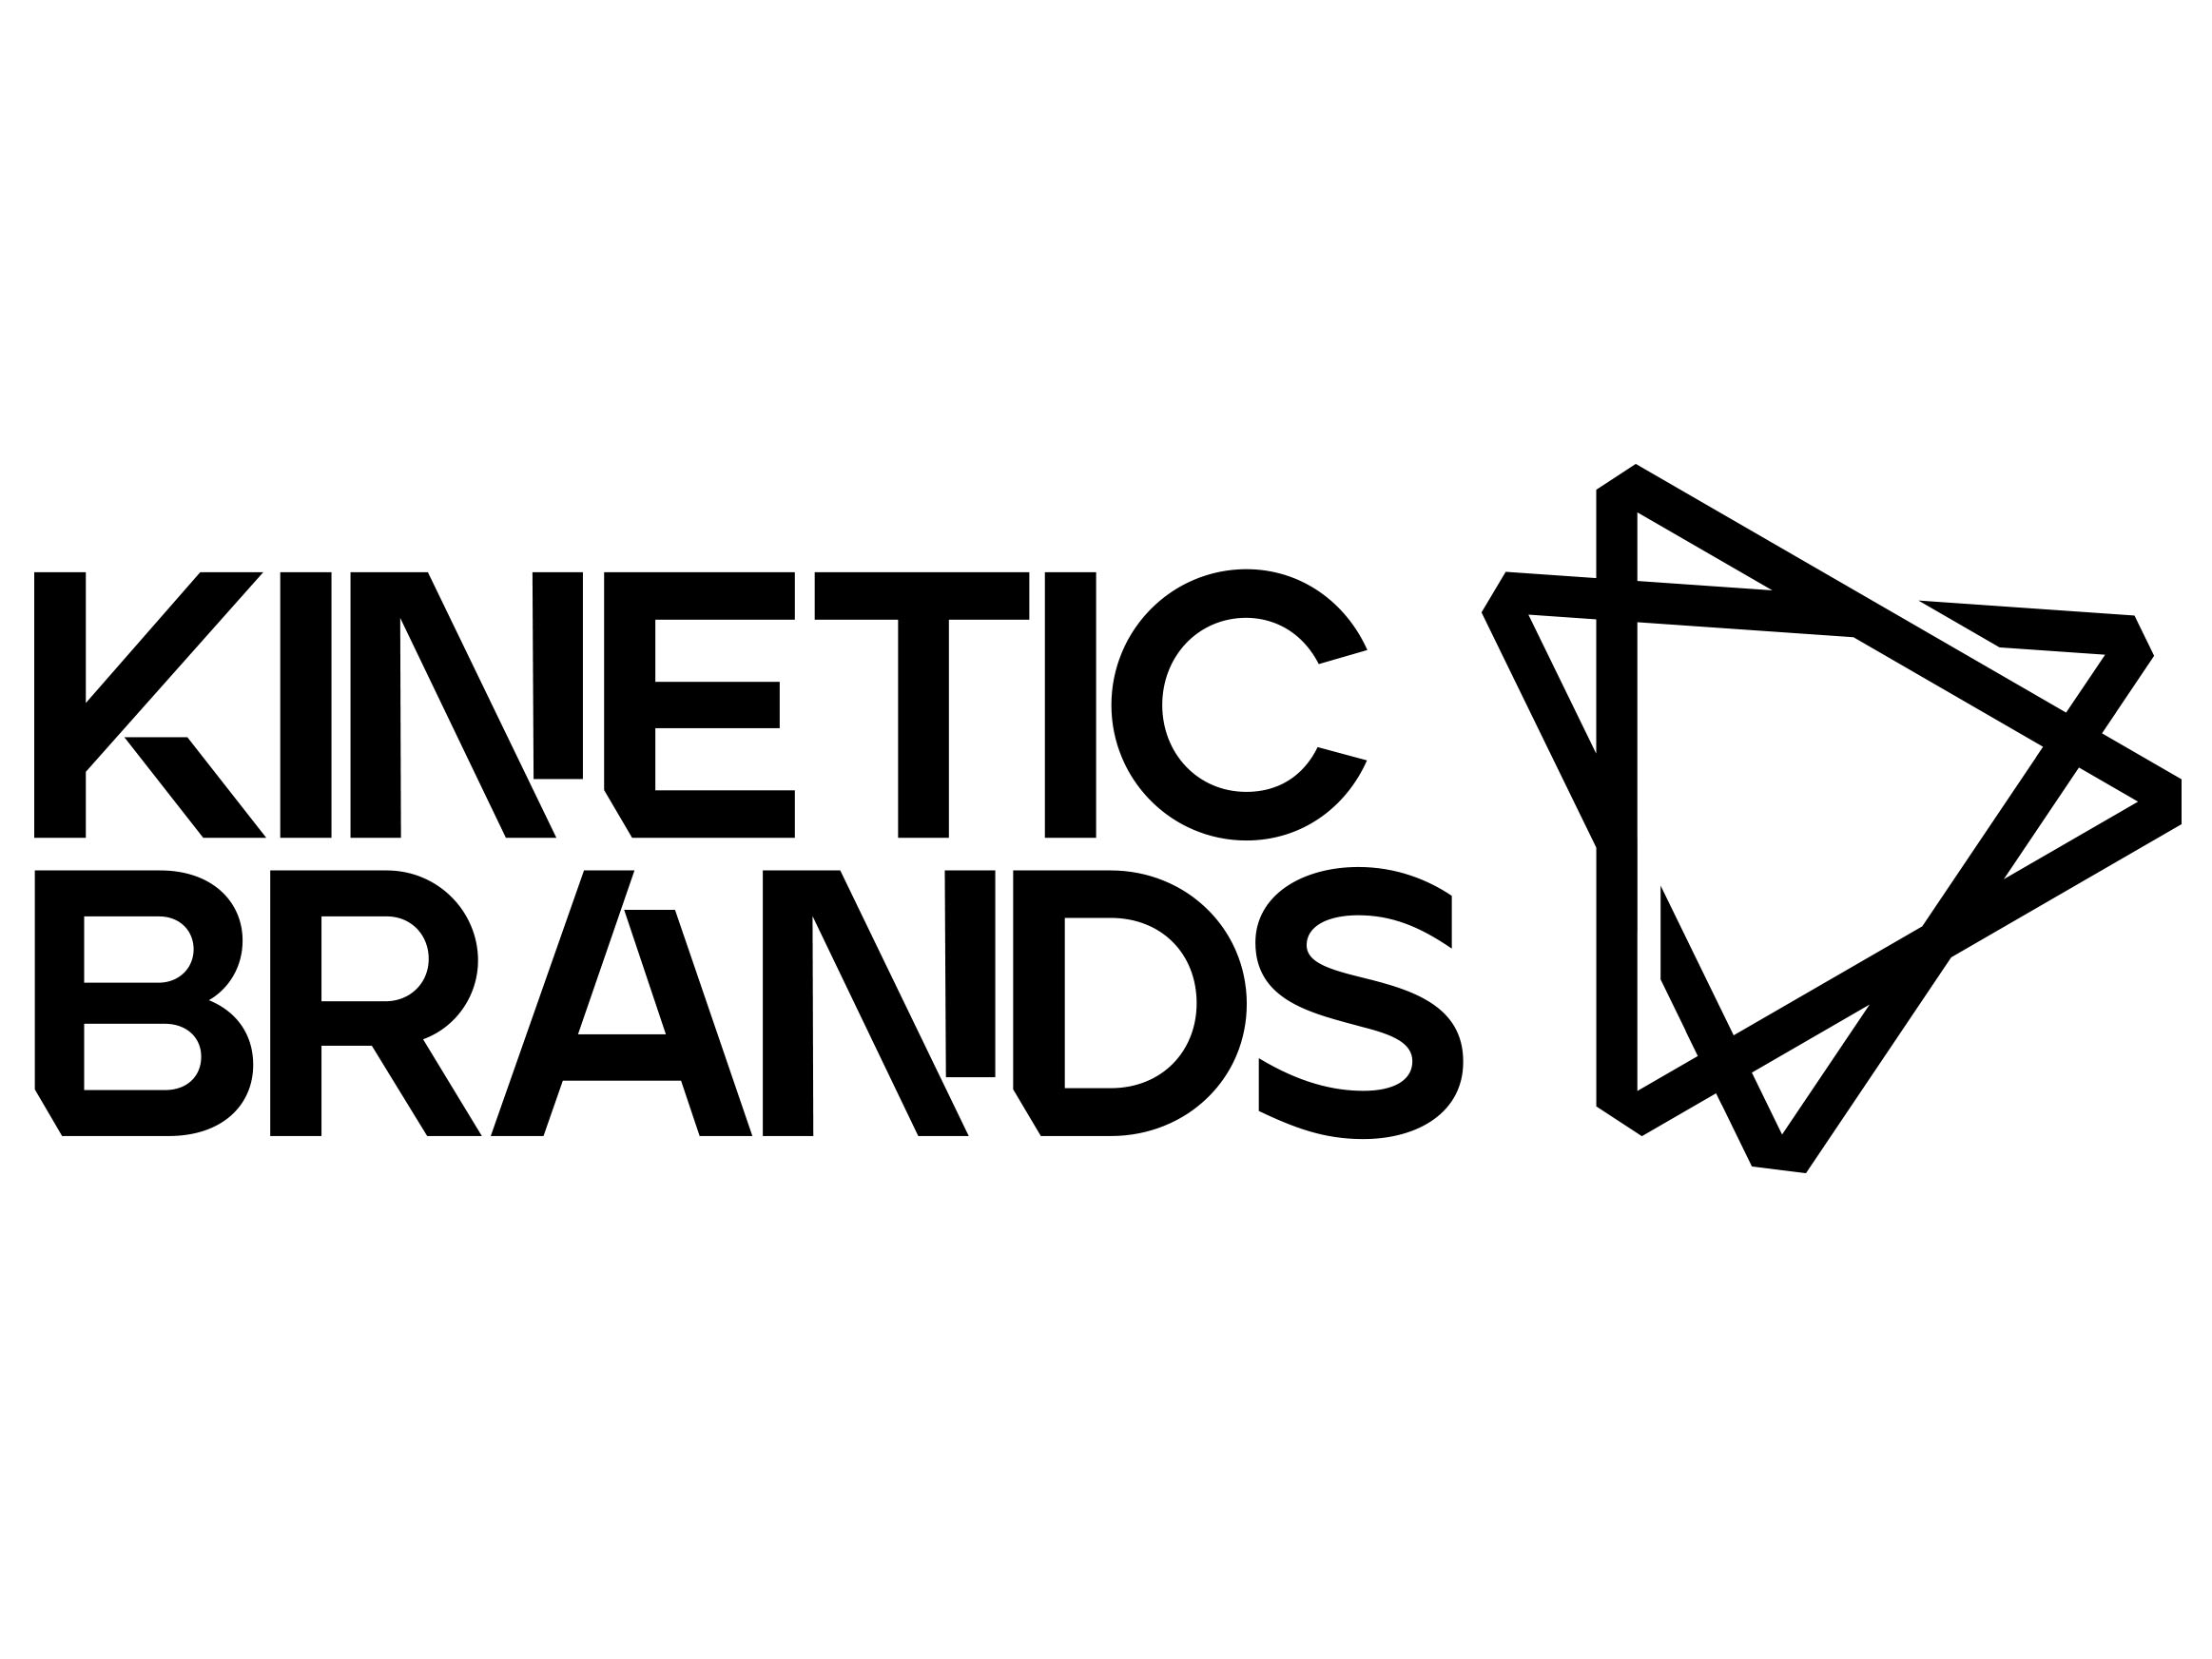 Kinetic Brands to develop the brand identity for a new Intellectual Property firm